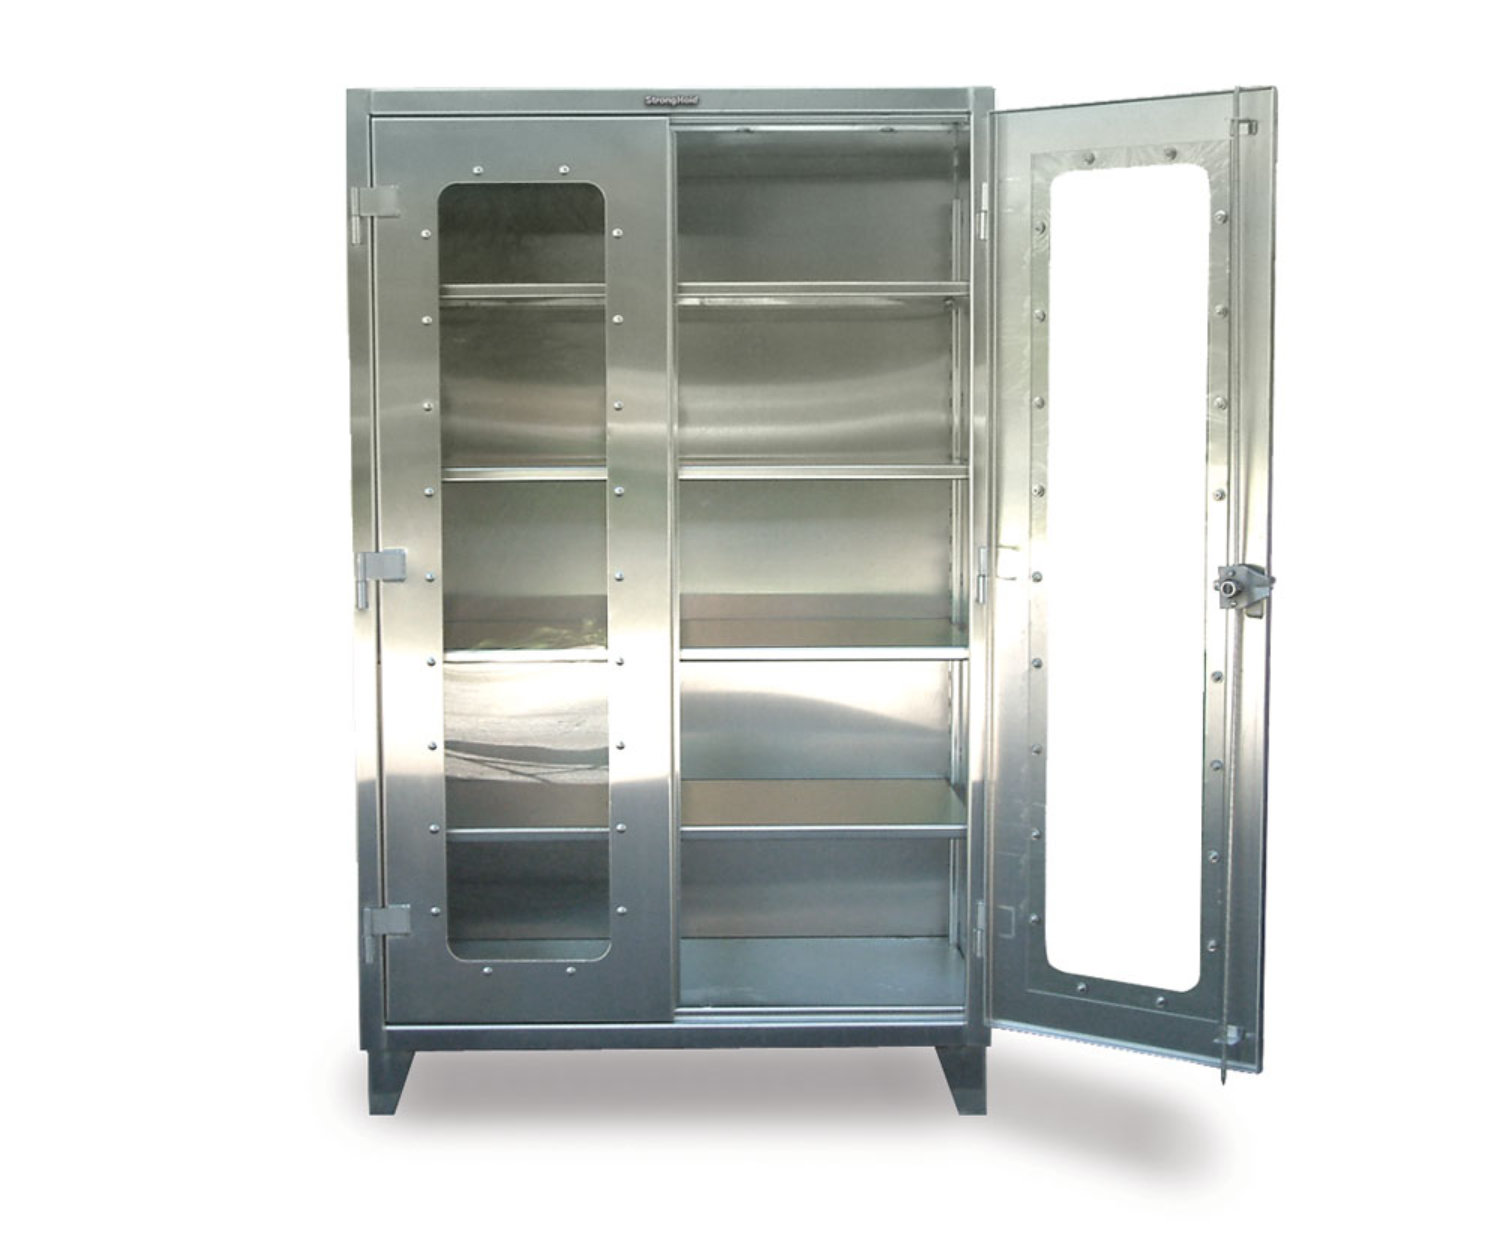 14 Gauge Clear View Storage Cabinet With 3 Shelves - 48 in. W X 24 in. D X  75 in. H